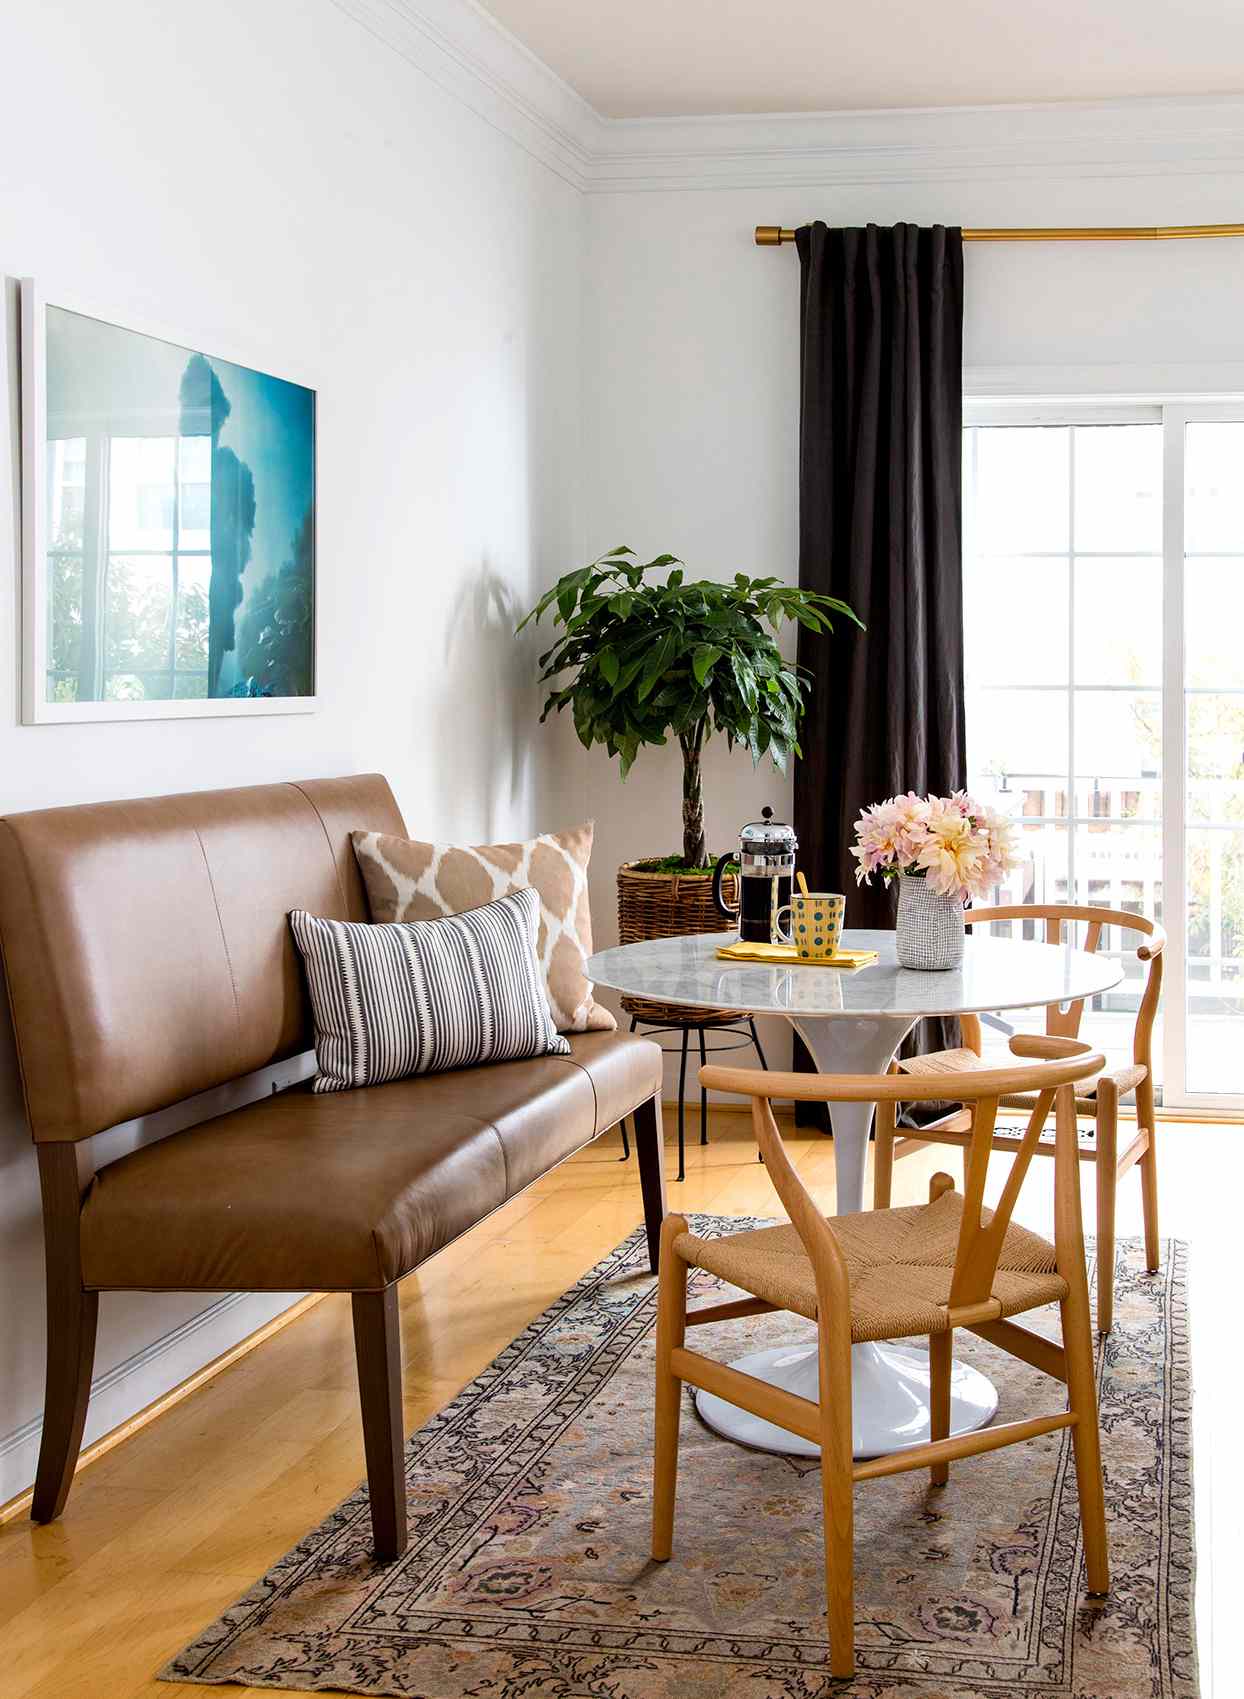 15 Small Dining Room Ideas To Make The Most Of Your Space Better Homes Gardens